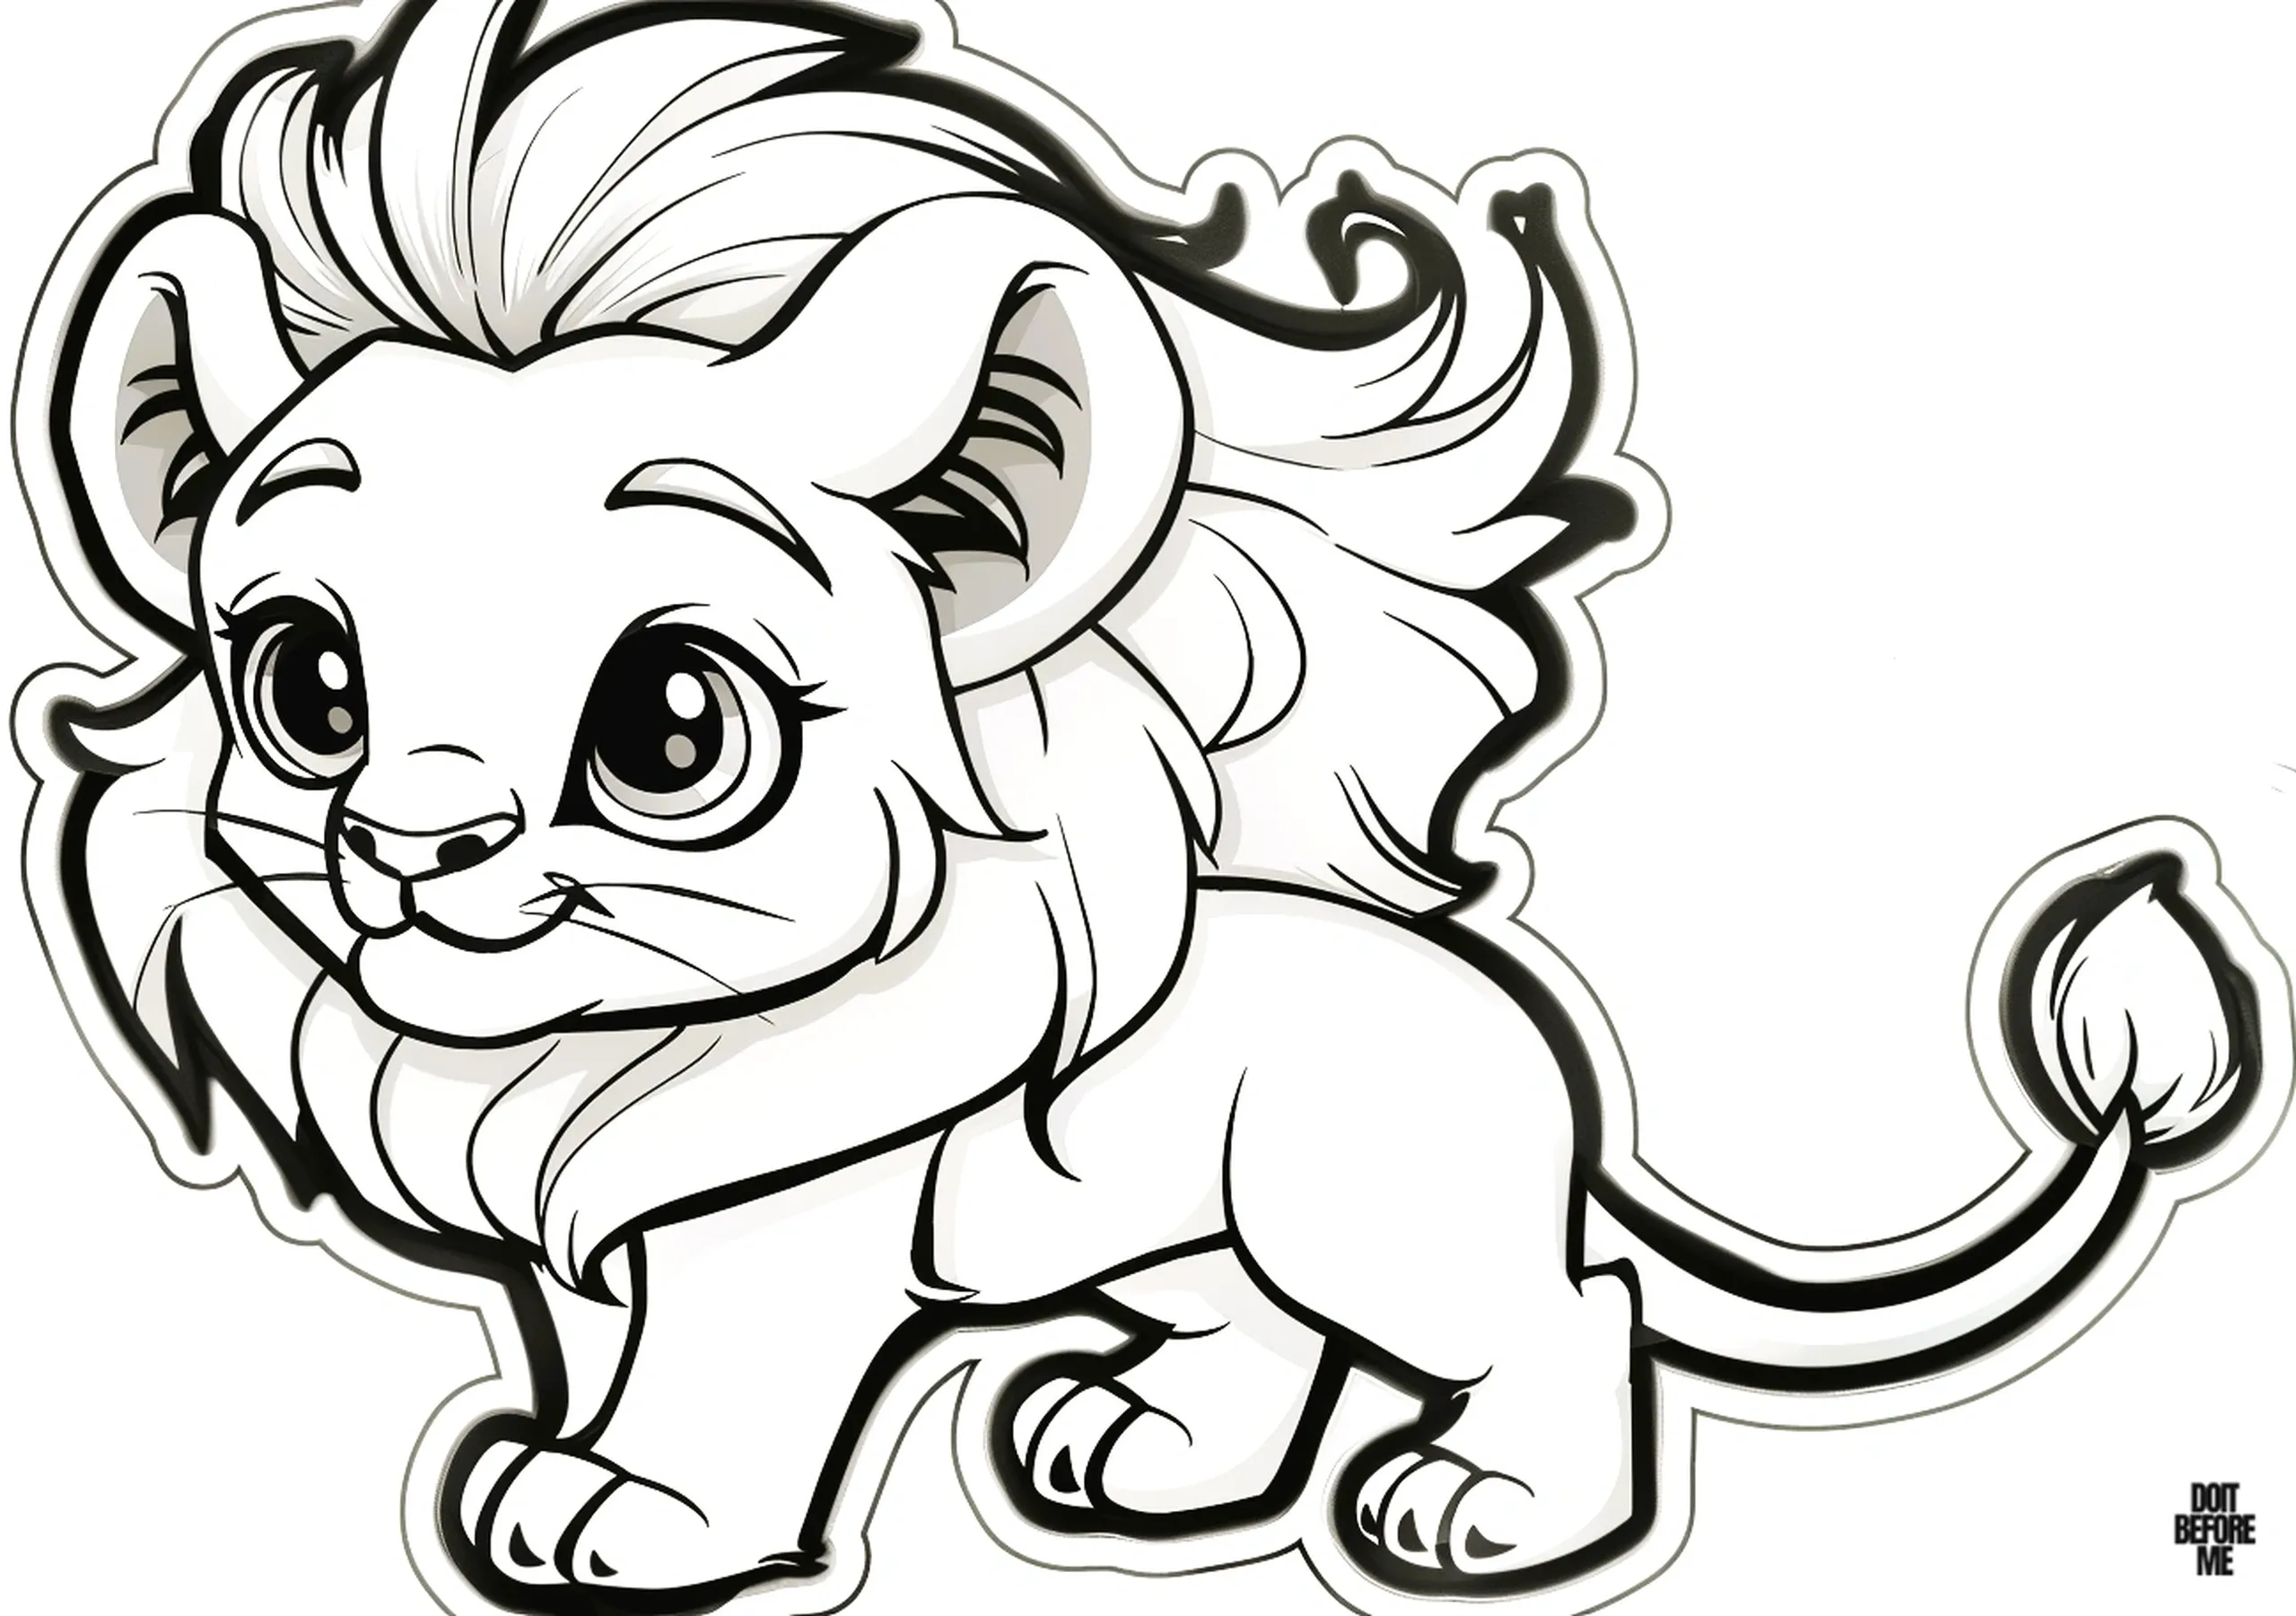 Coloring page of a baby male lion with huge, long manes waving in the wind. The whole body of the baby lion is visible in cartoon style.